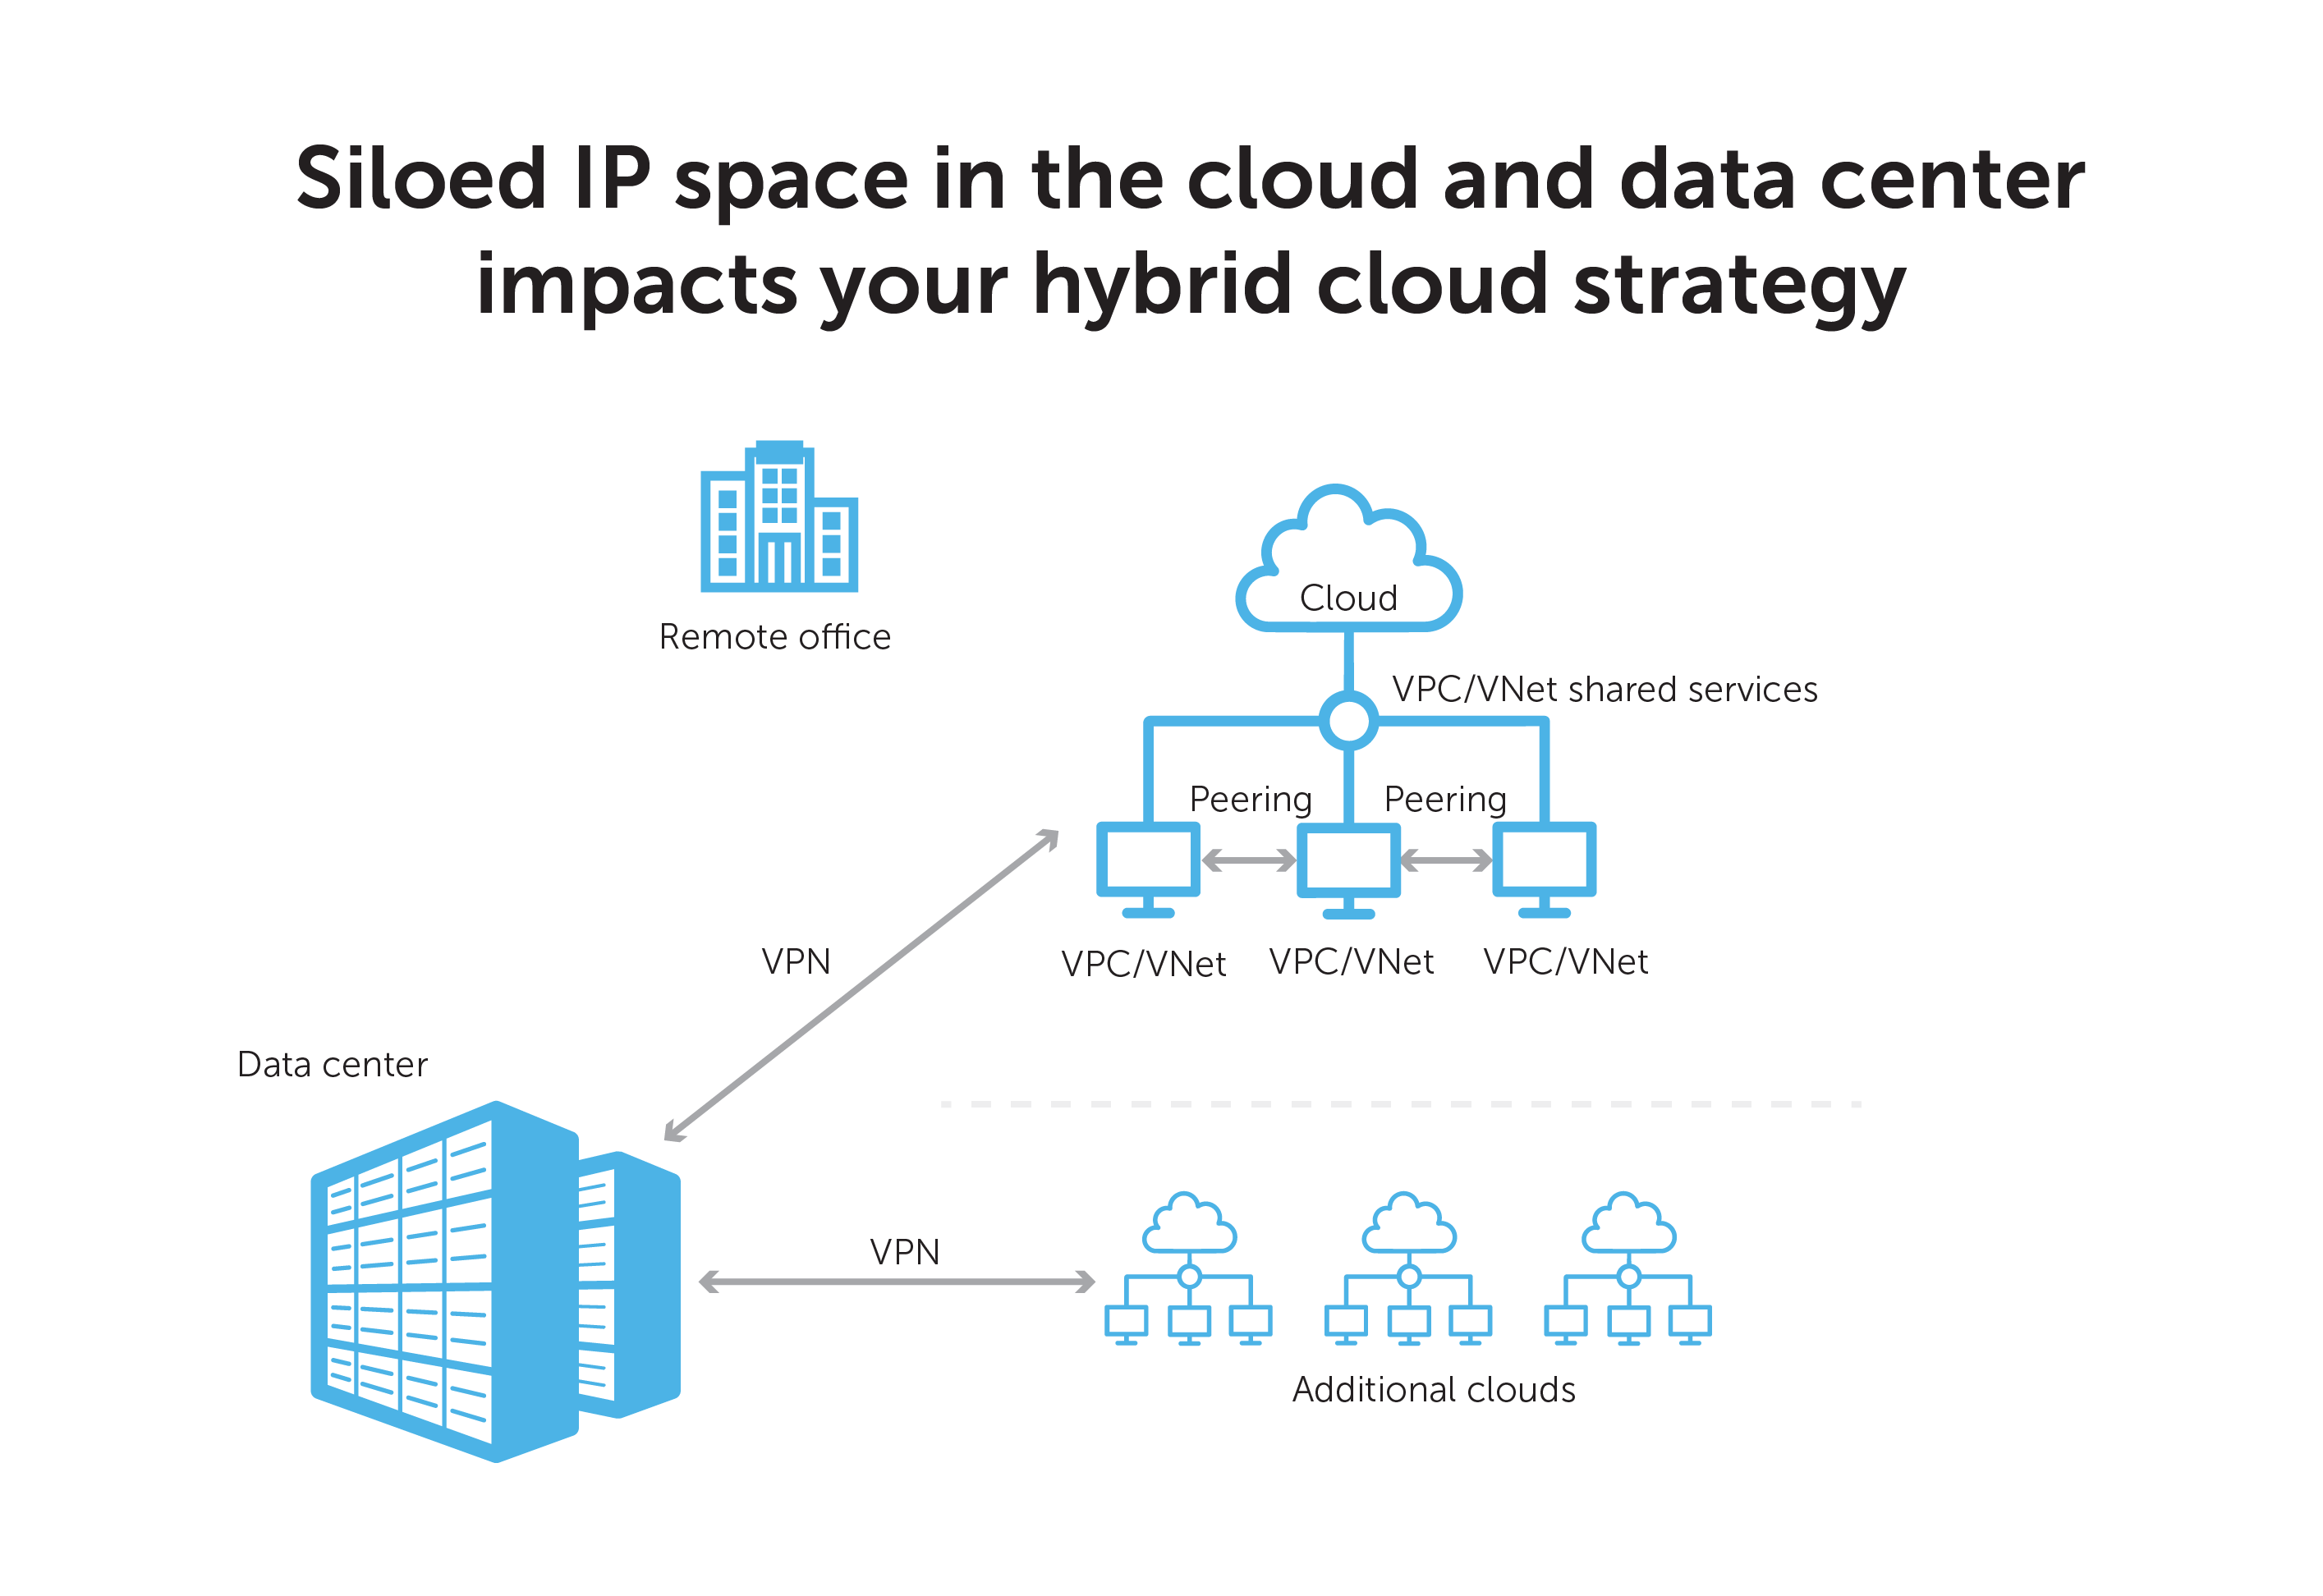 Siloed IP space in the cloud and data center impacts your hybrid cloud strategy